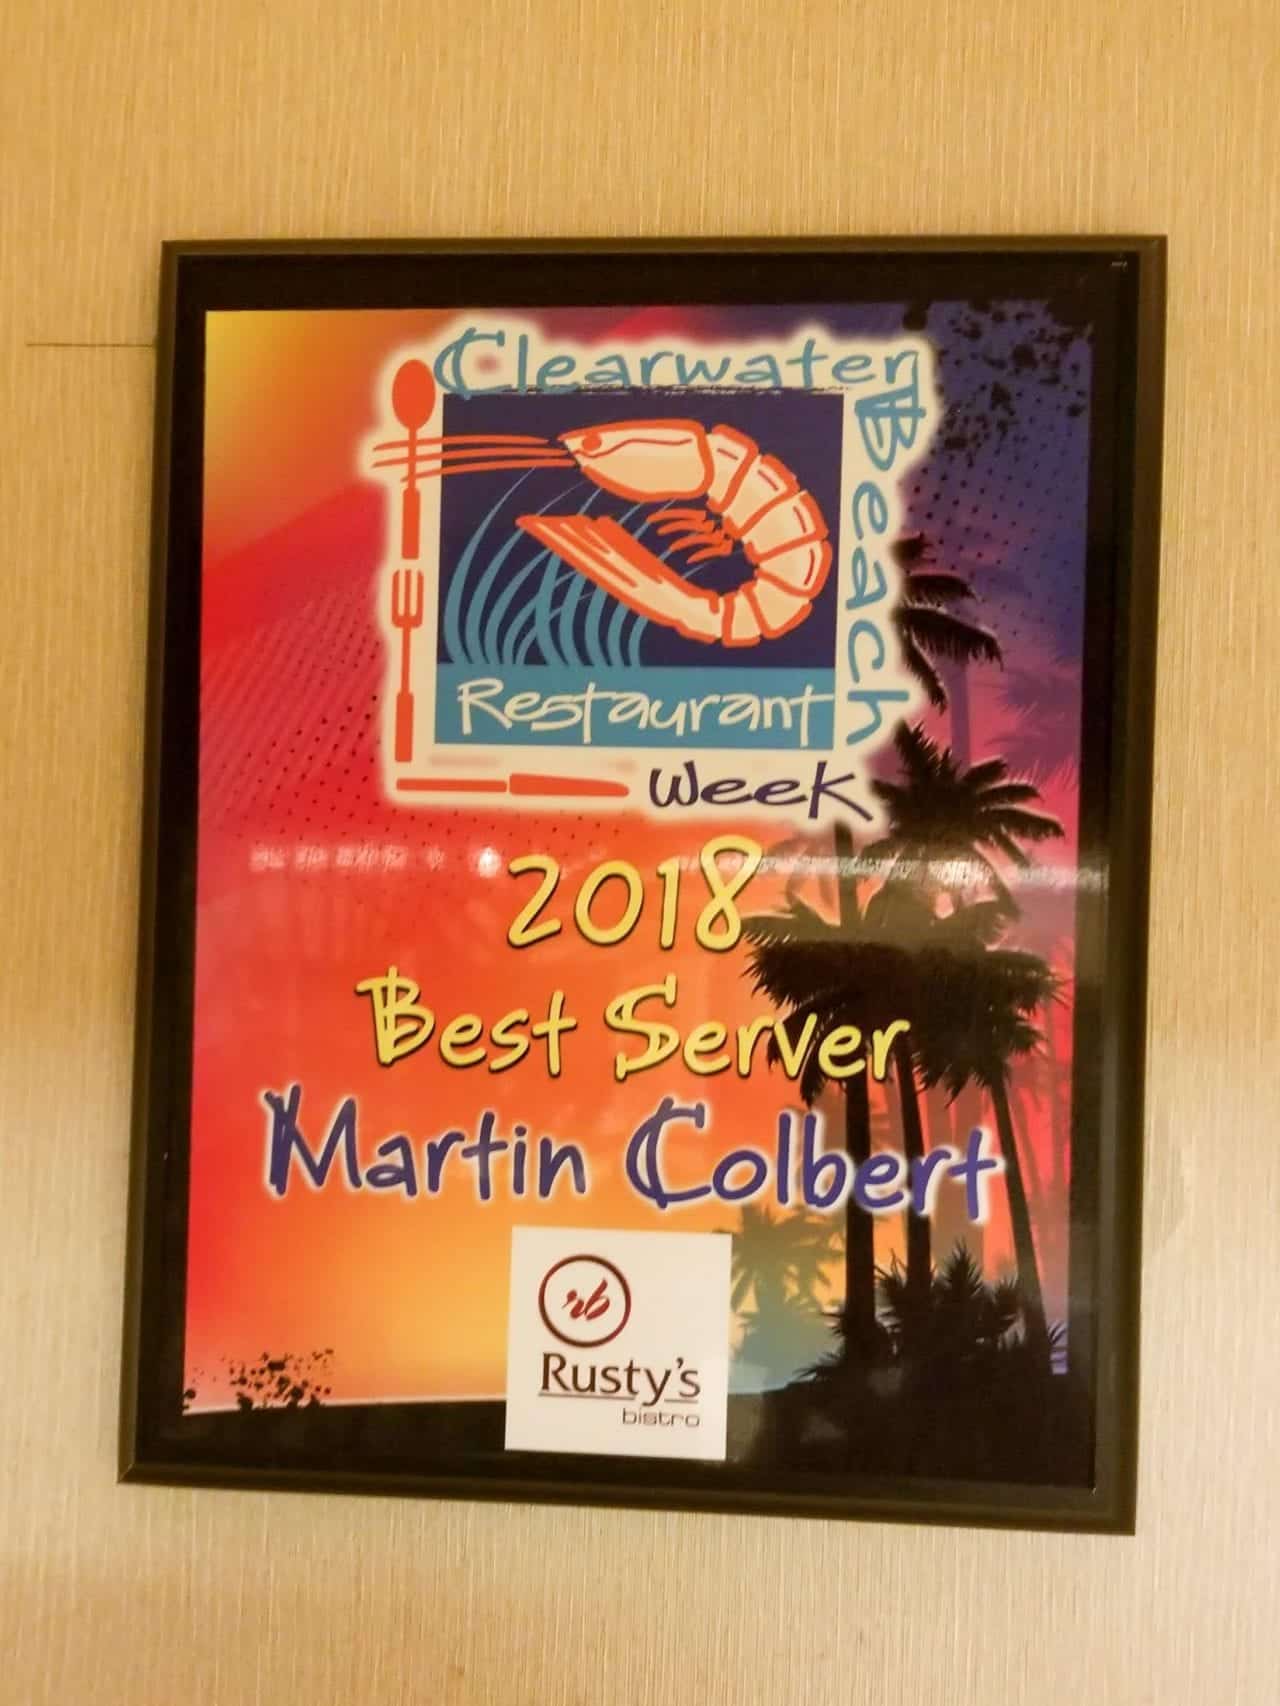 Martin was our server at Rusty's. We agree with this award!